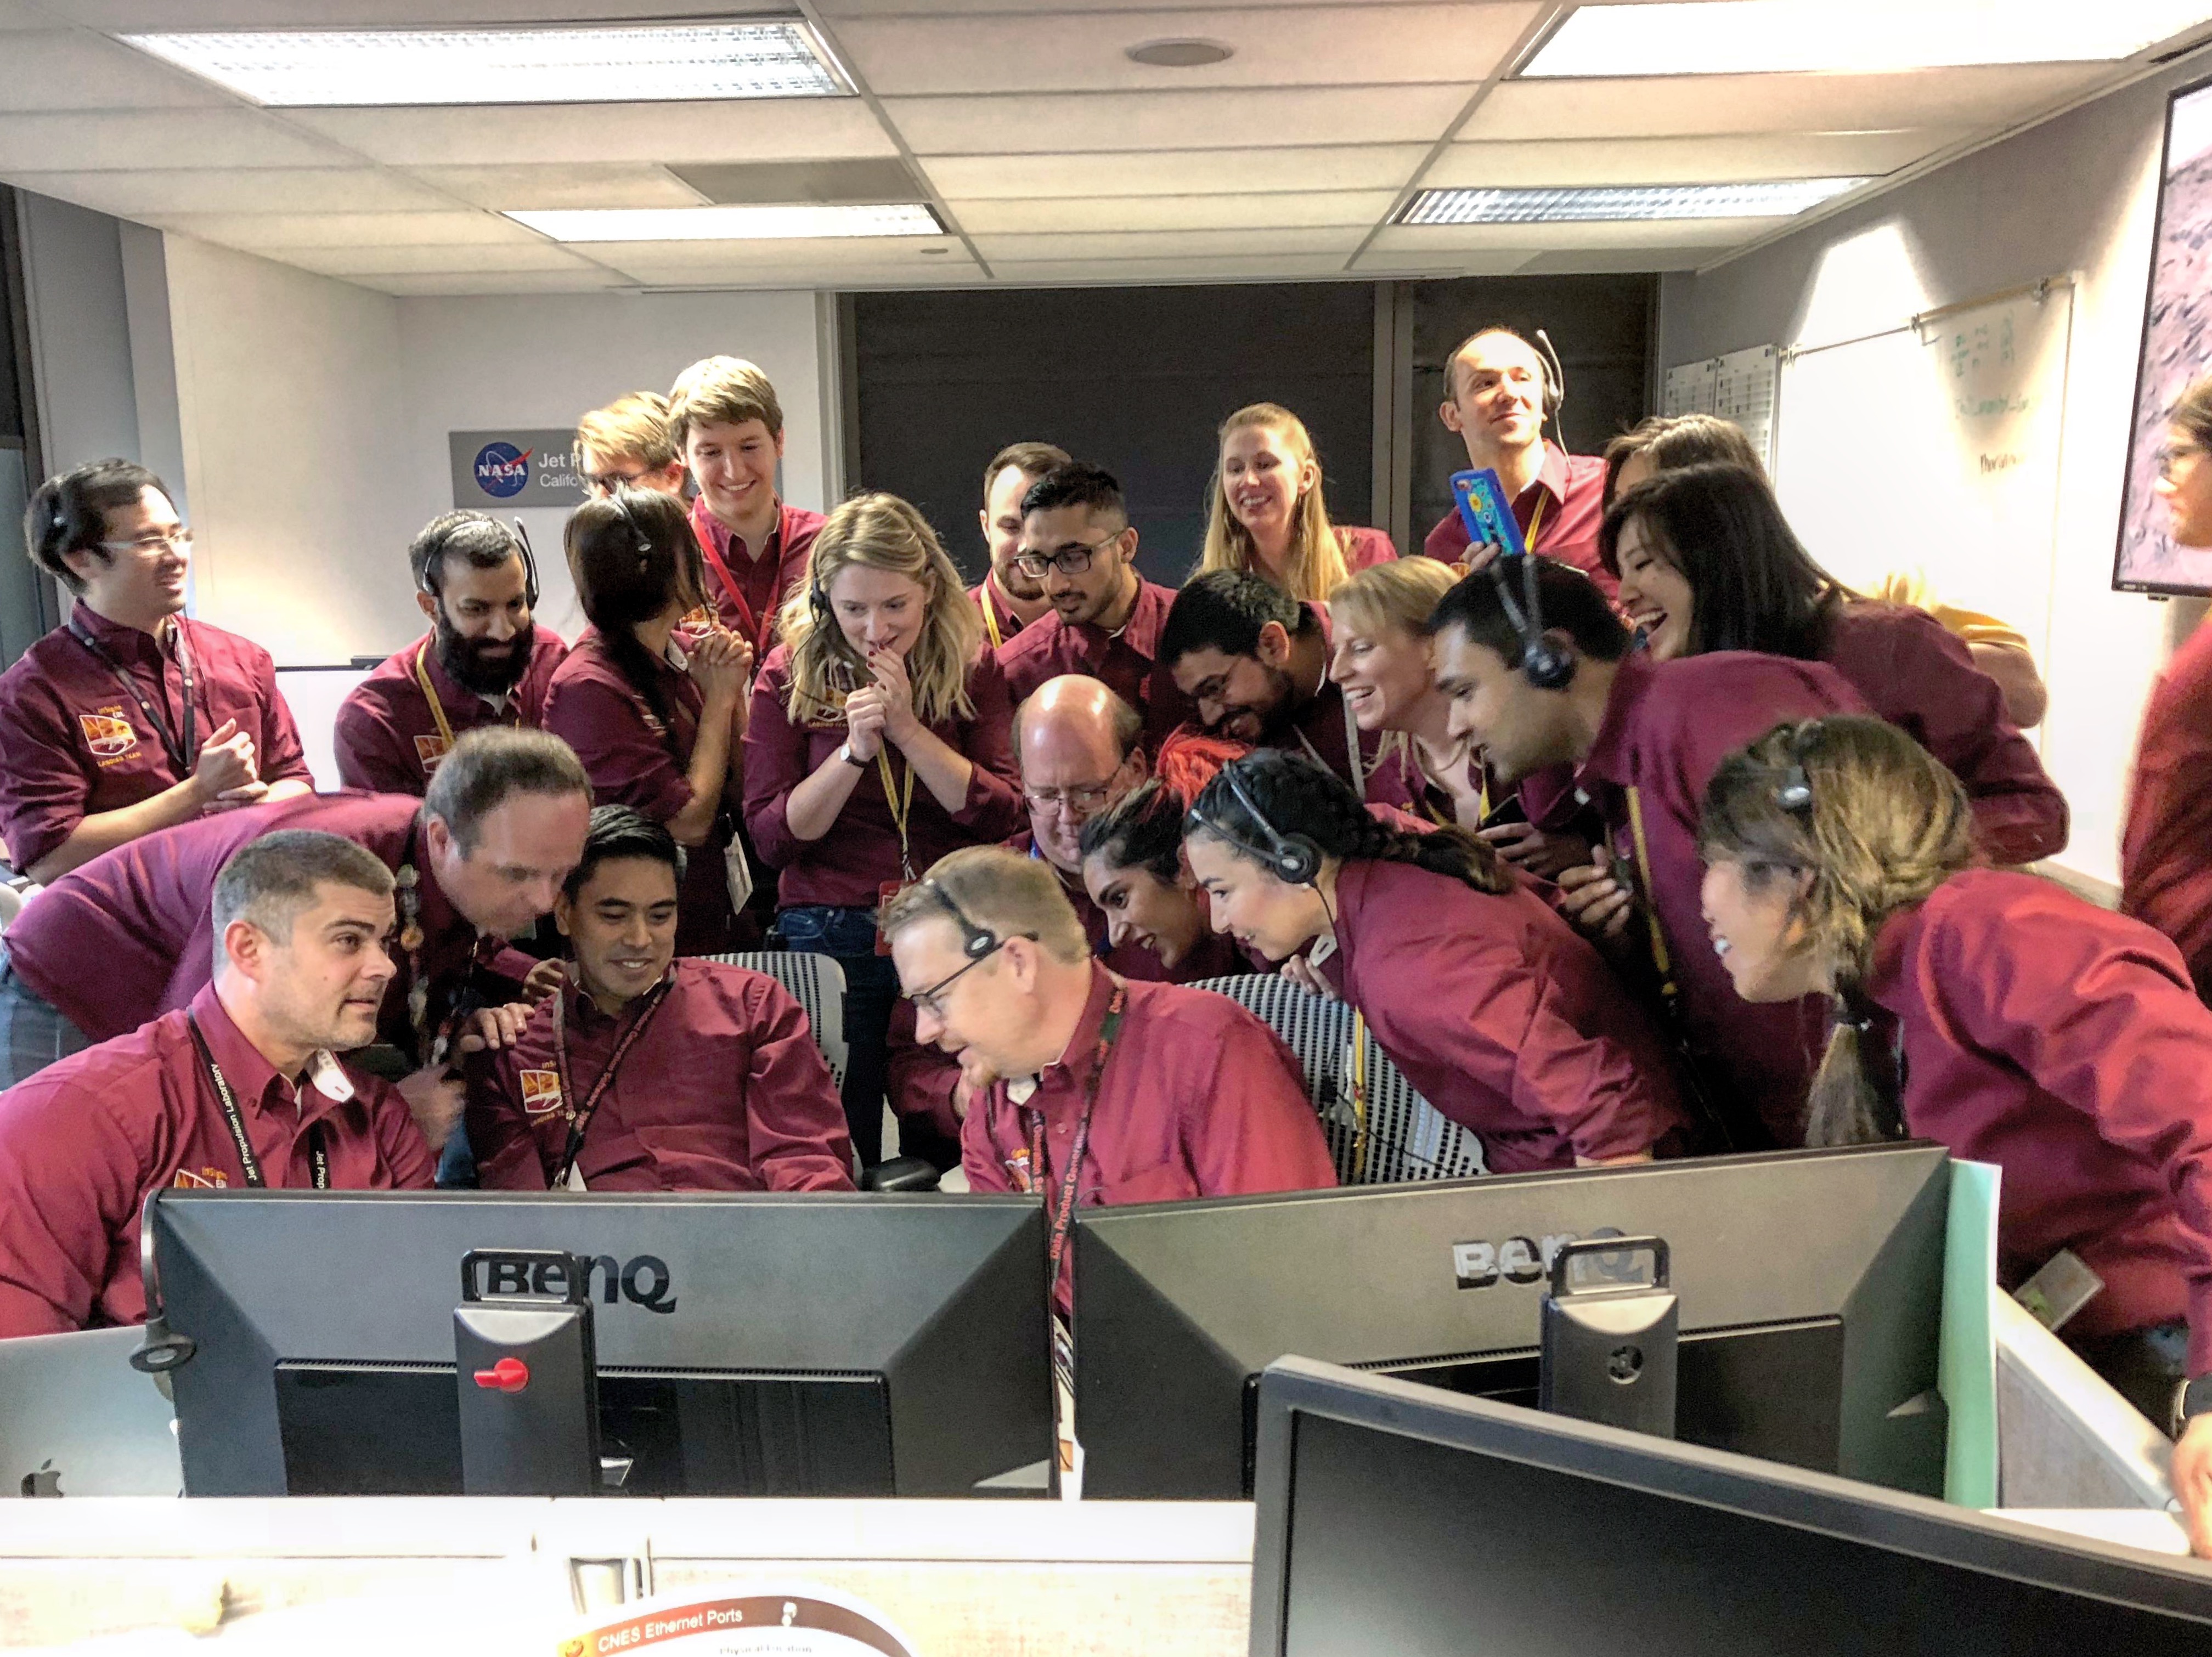 NASA’s InSight mission team in the surface operations area at the Jet Propulsion Laboratory in Pasadena, California, converging on computer screens to get a glimpse of the first picture of Mars on Nov. 26, 2018.